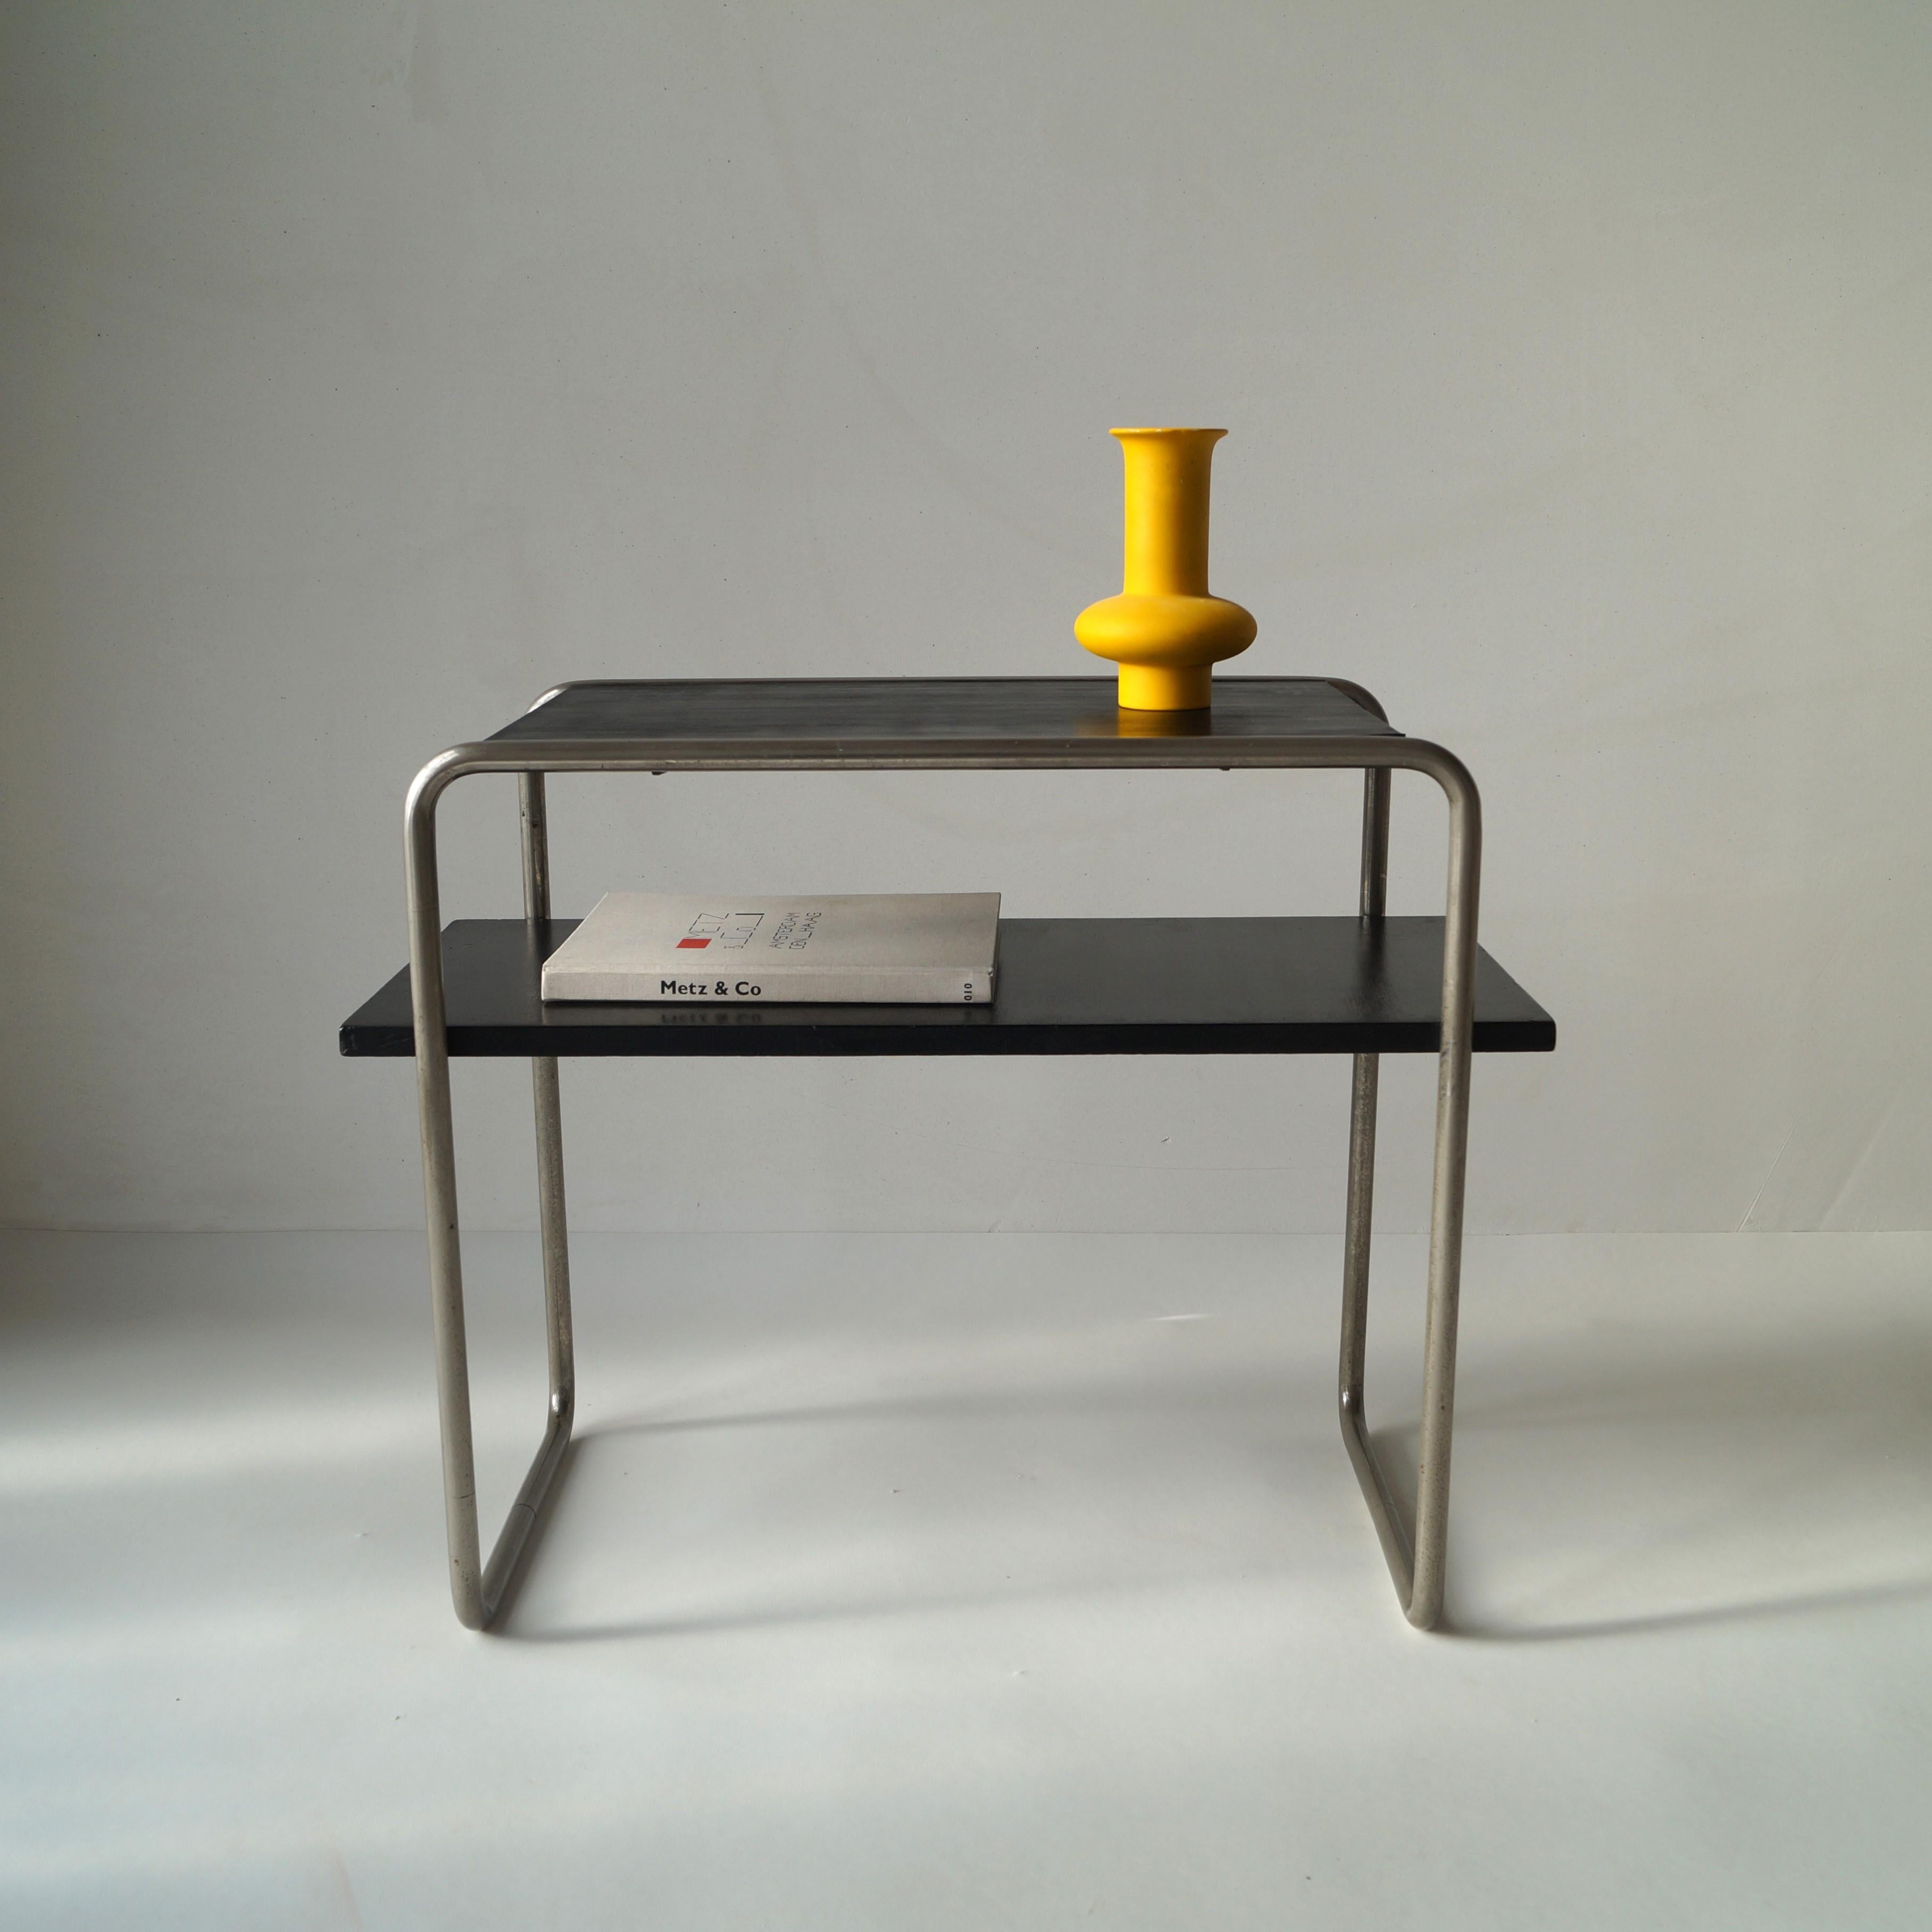 A rare and iconic 1930s B12 console or side table, made from tubular steel and wood, designed by Marcel Breuer in 1928. This model is no longer in production. The distinctive feature of the B12 is the fact that the lower shelf is longer than the